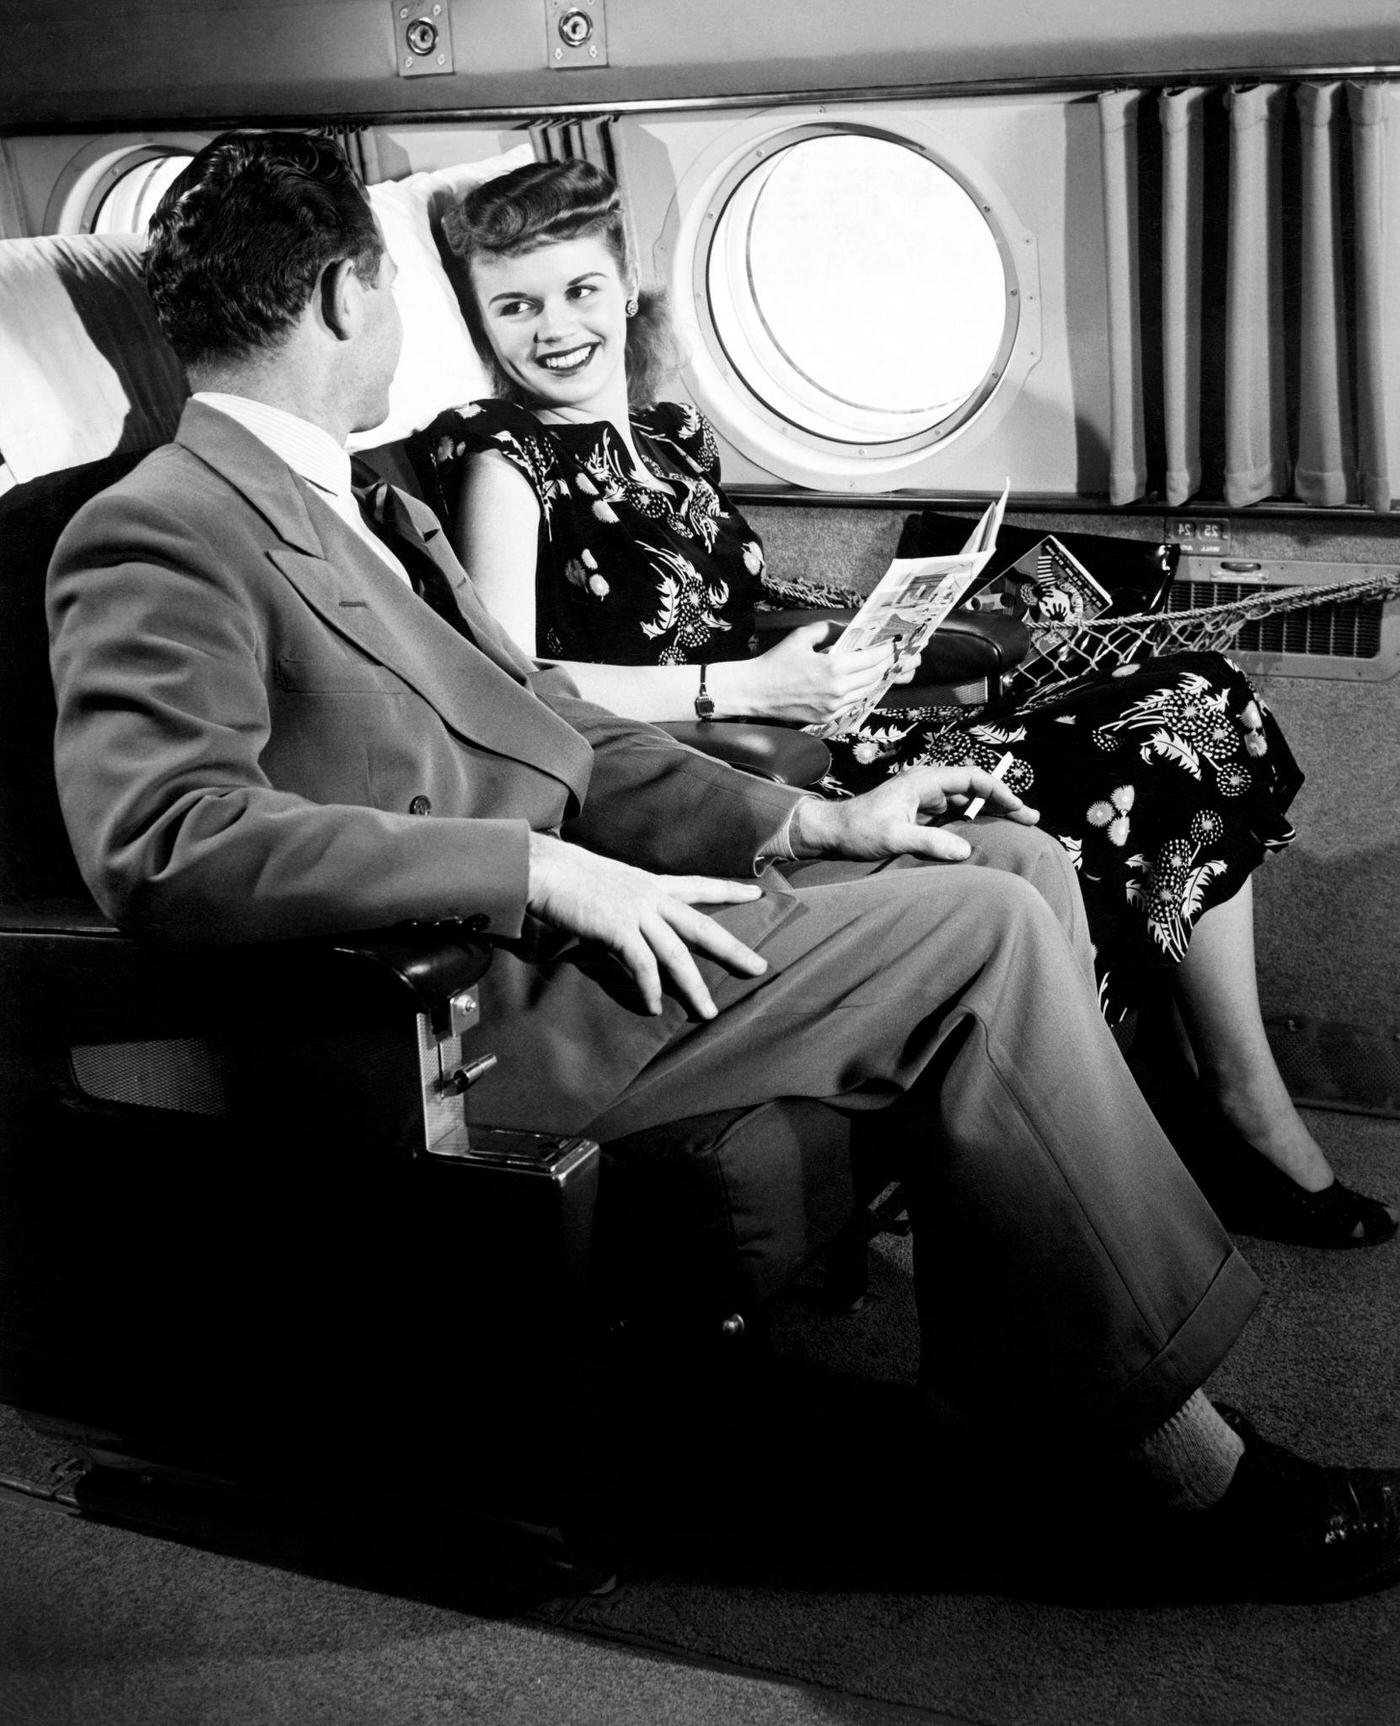 A couple is pictured on a plane in 1940.